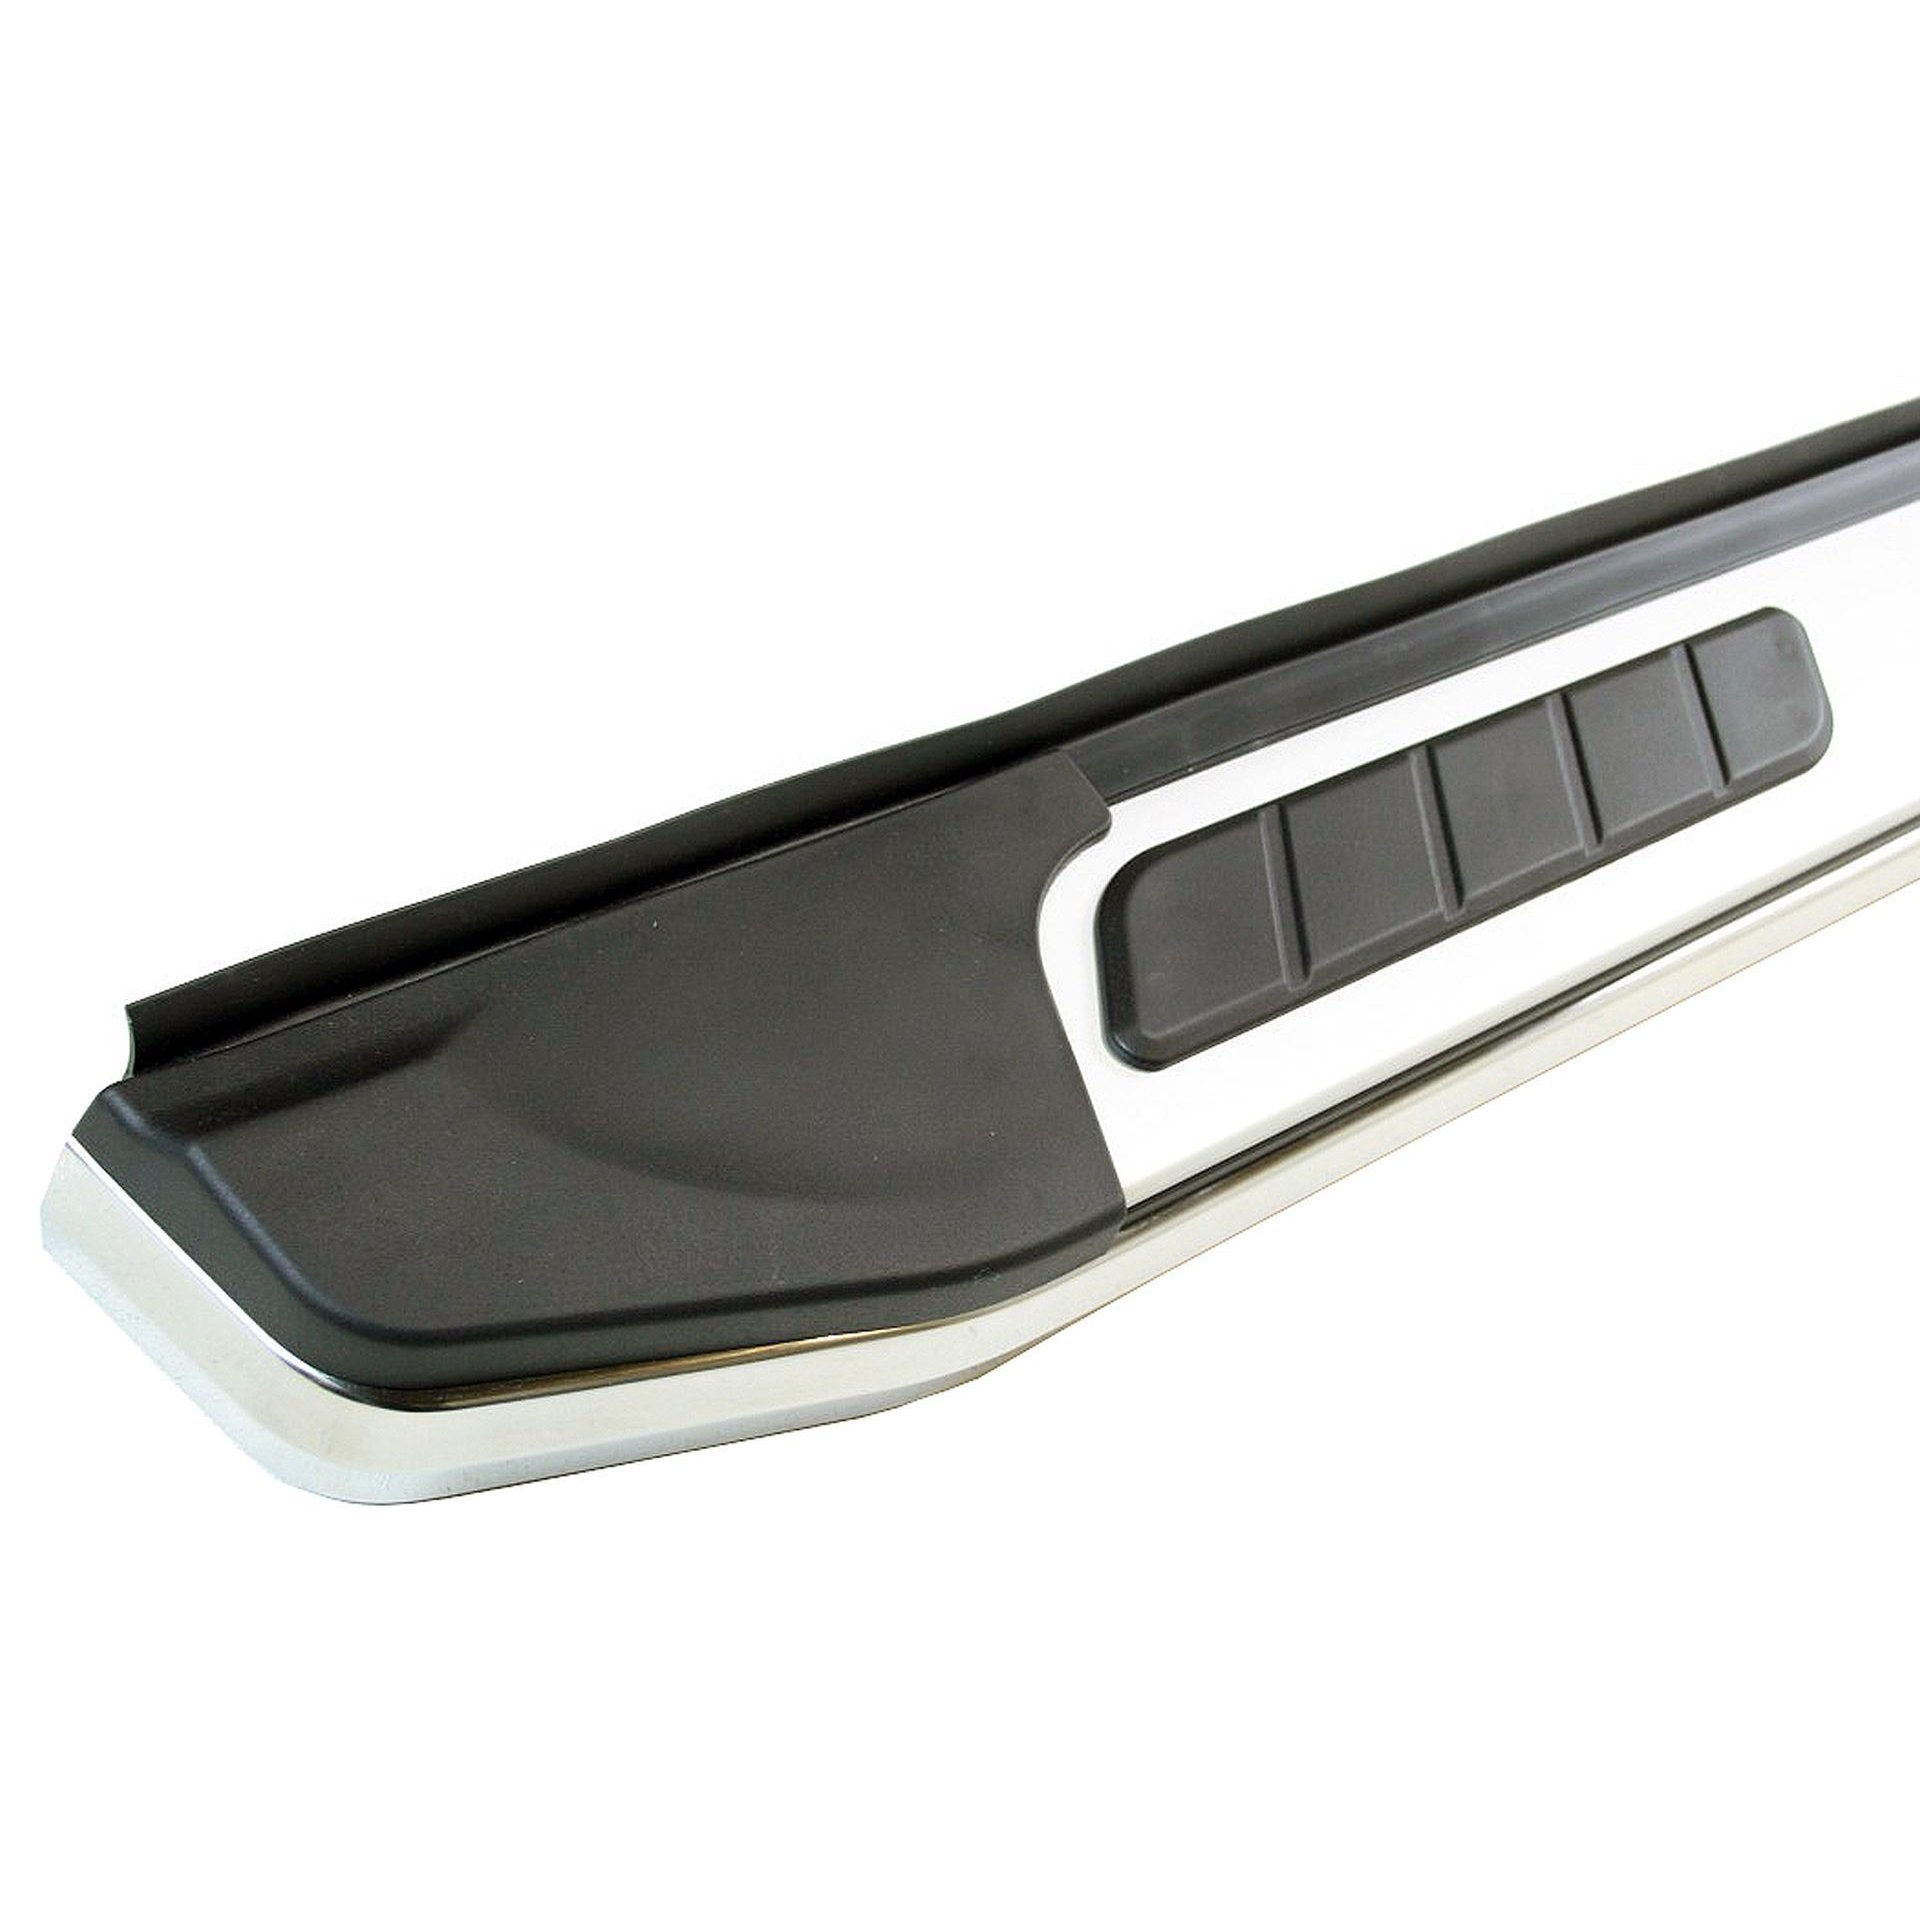 Suburban Side Steps Running Boards for Range Rover Evoque Pure & Prestige 11-18 -  - sold by Direct4x4